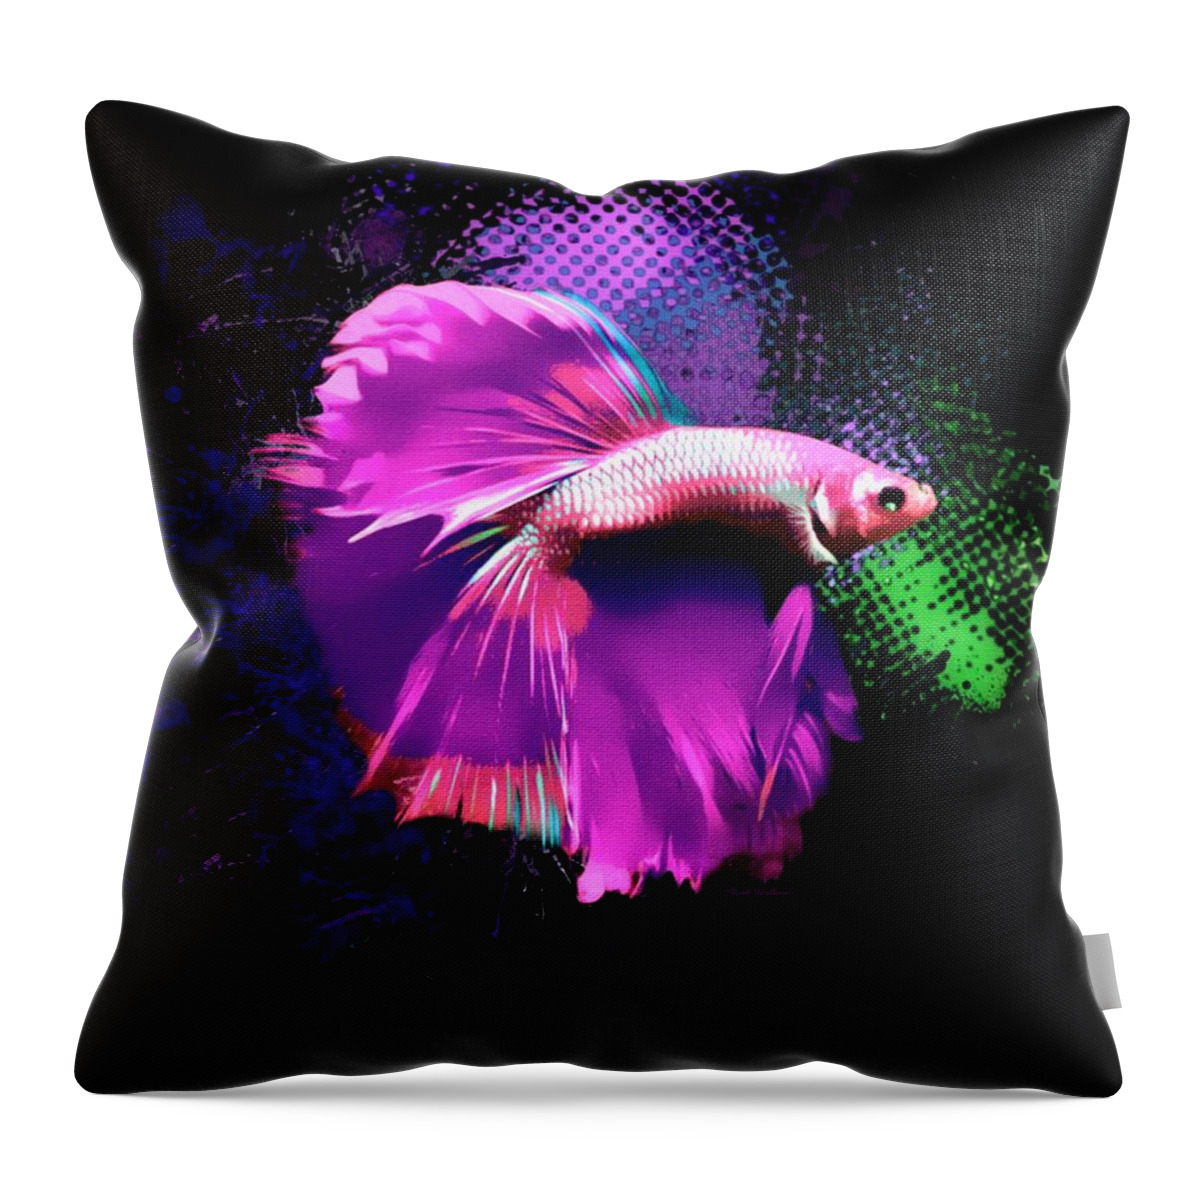 Fish Throw Pillow featuring the digital art Glowing Magenta Betta Fish Abstract Portrait by Scott Wallace Digital Designs